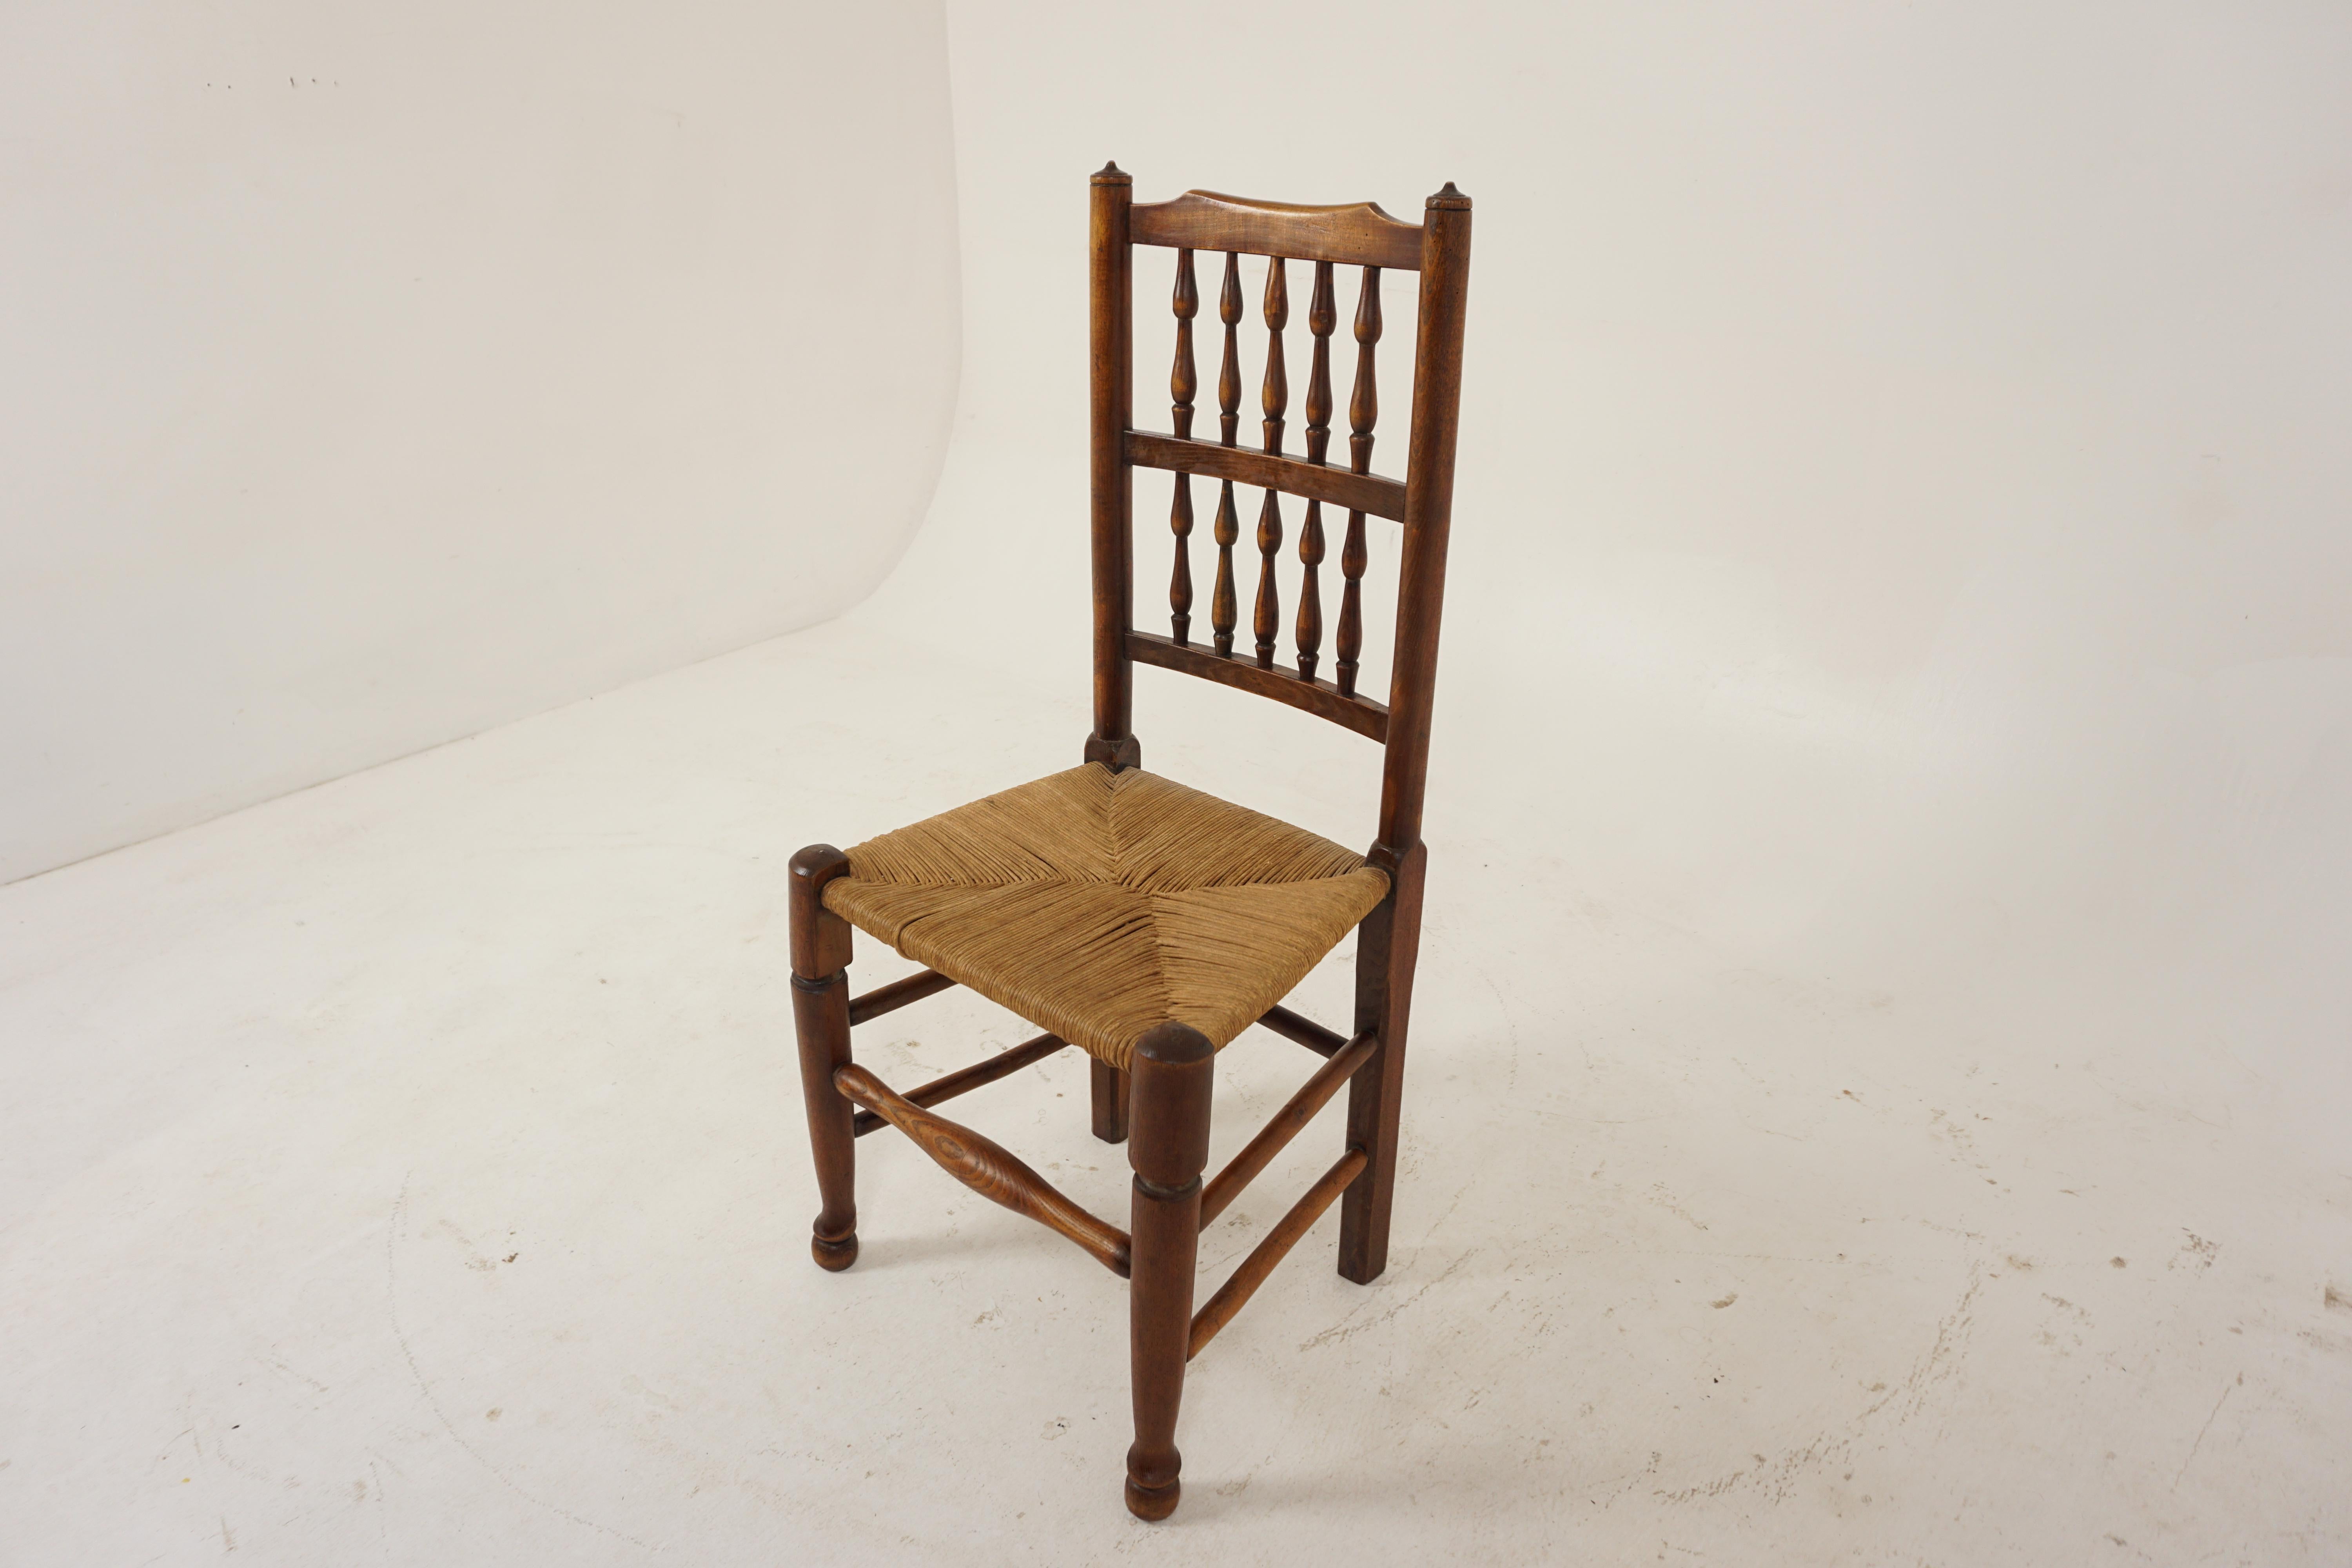 Antique Elm and Beechwood Lancashire rope seated chair, Scotland 1900, B2923

Scotland 1900
Solid Elm
Original Finish
Shaped to rail
With decorative turned spindle back
With rope seat
Supported on shaped front legs
The front legs terminate in pad